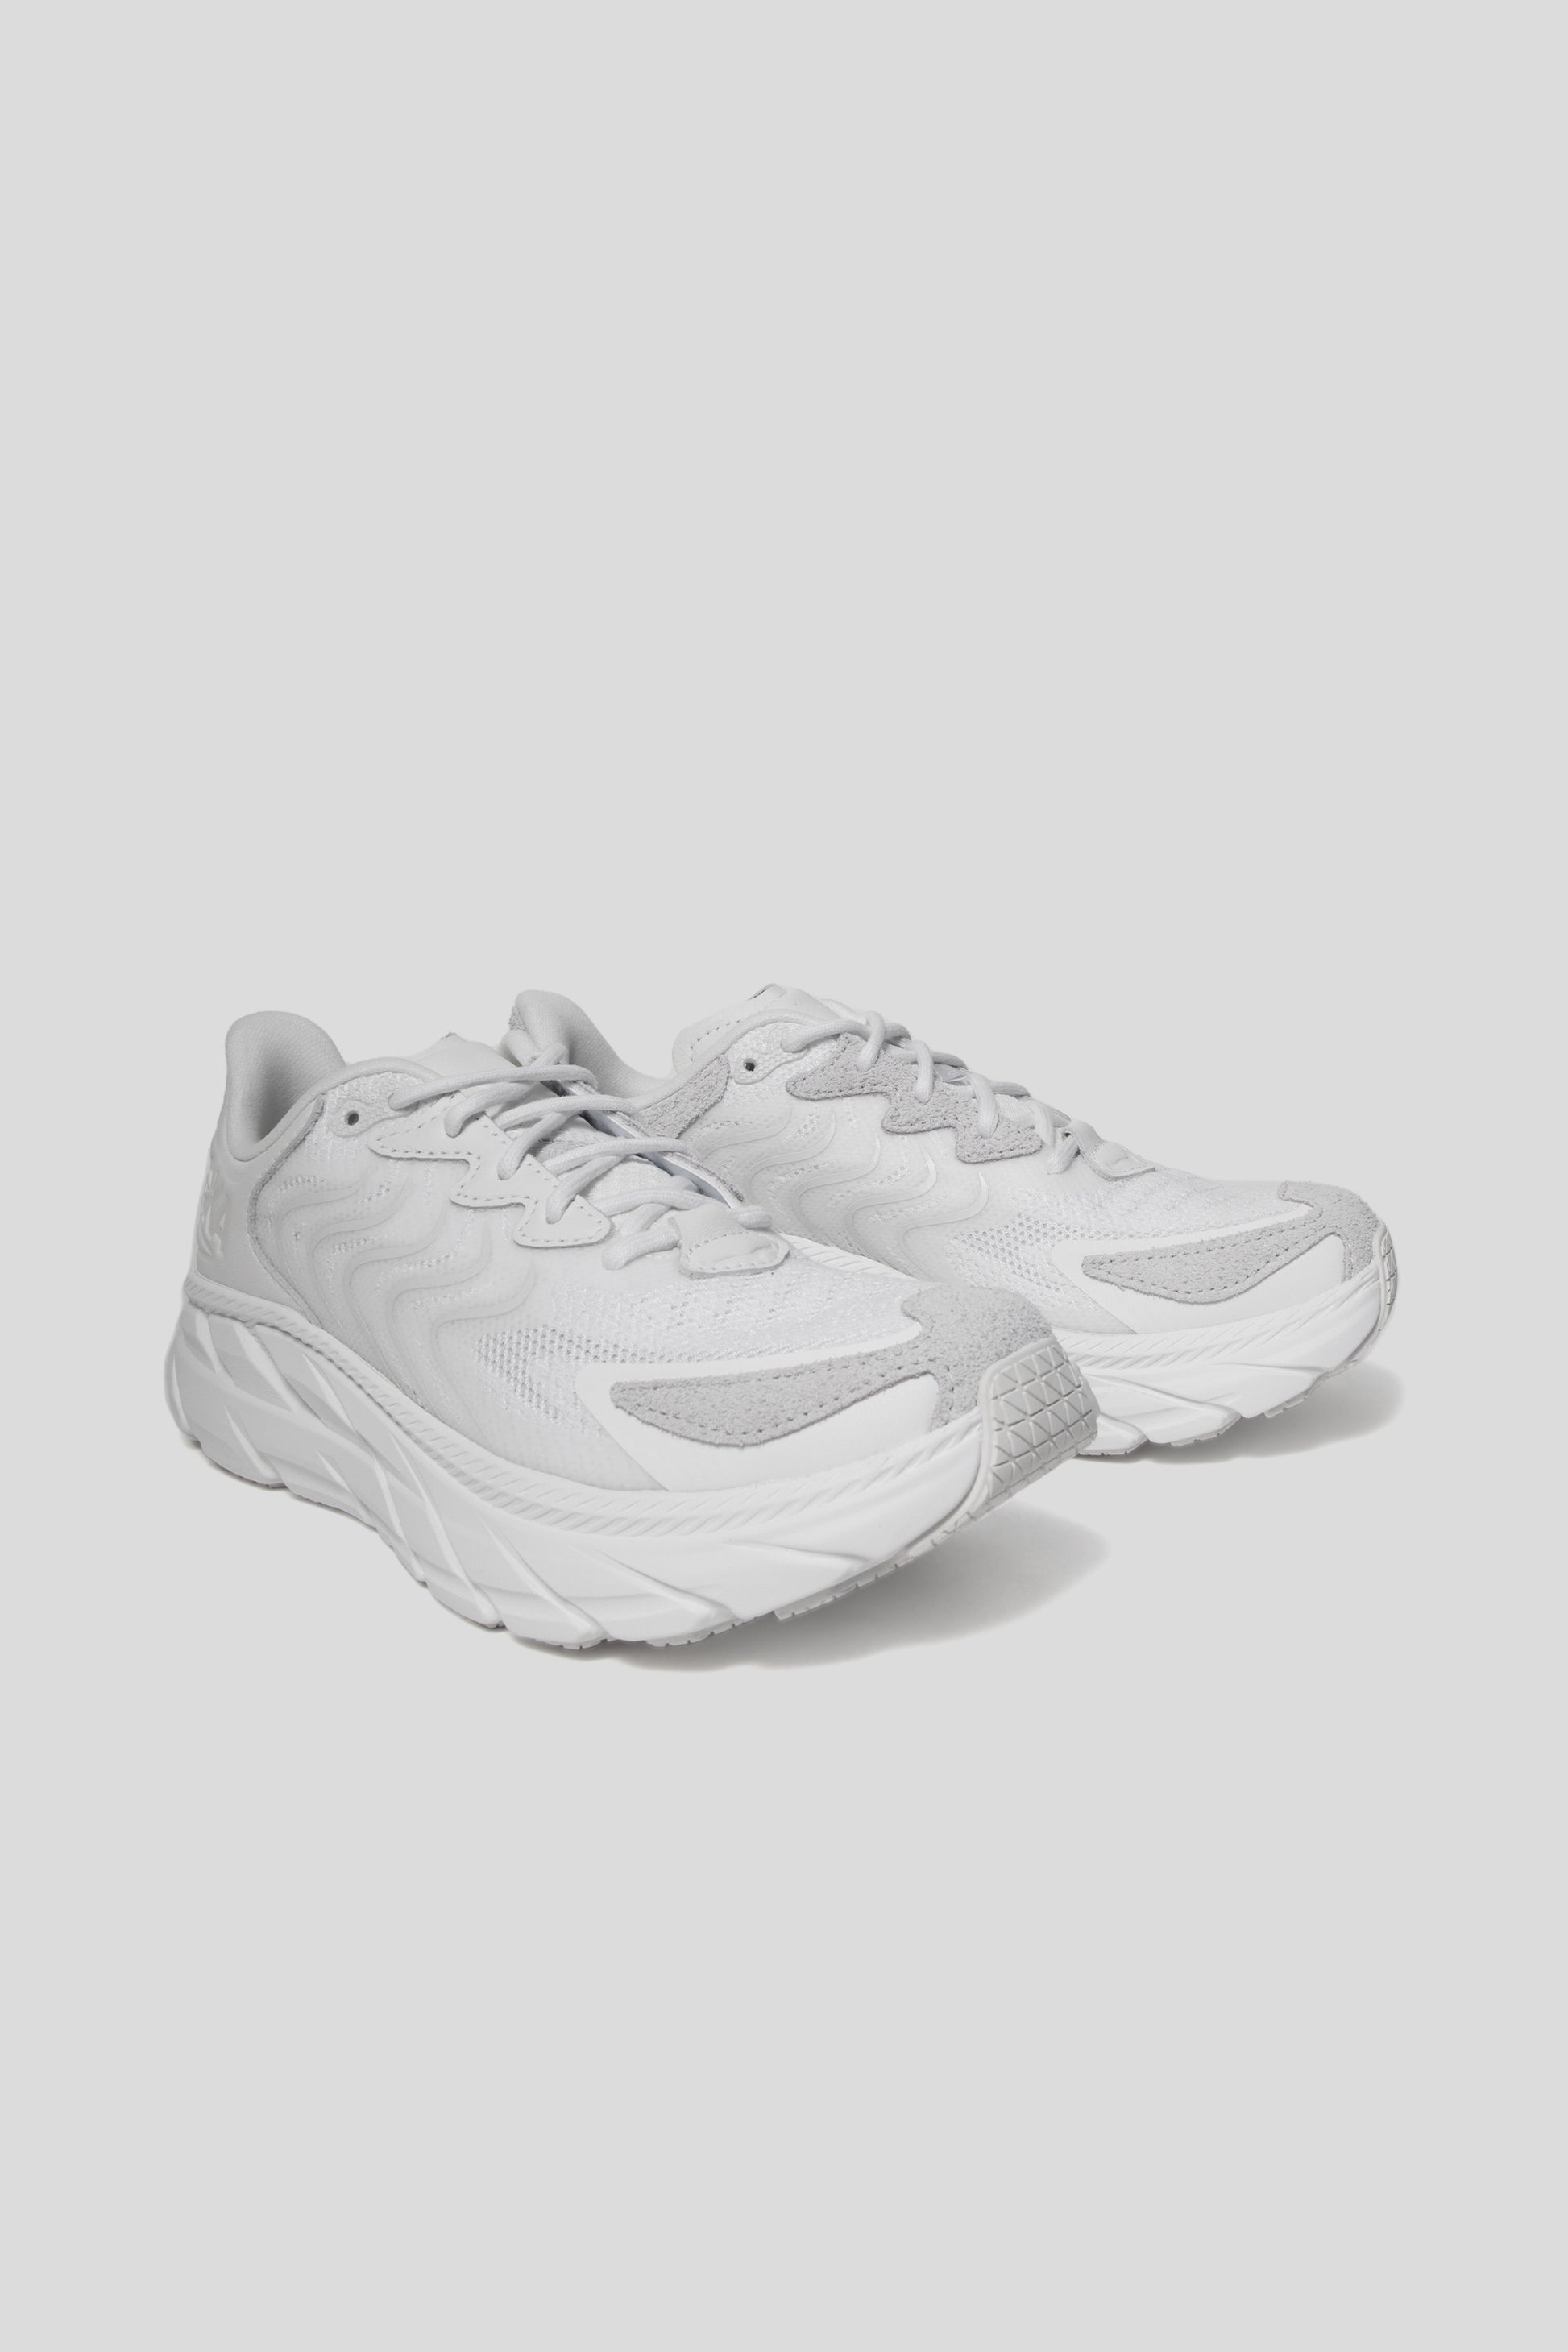 All Gender Clifton LS in White / Nimbus Cloud